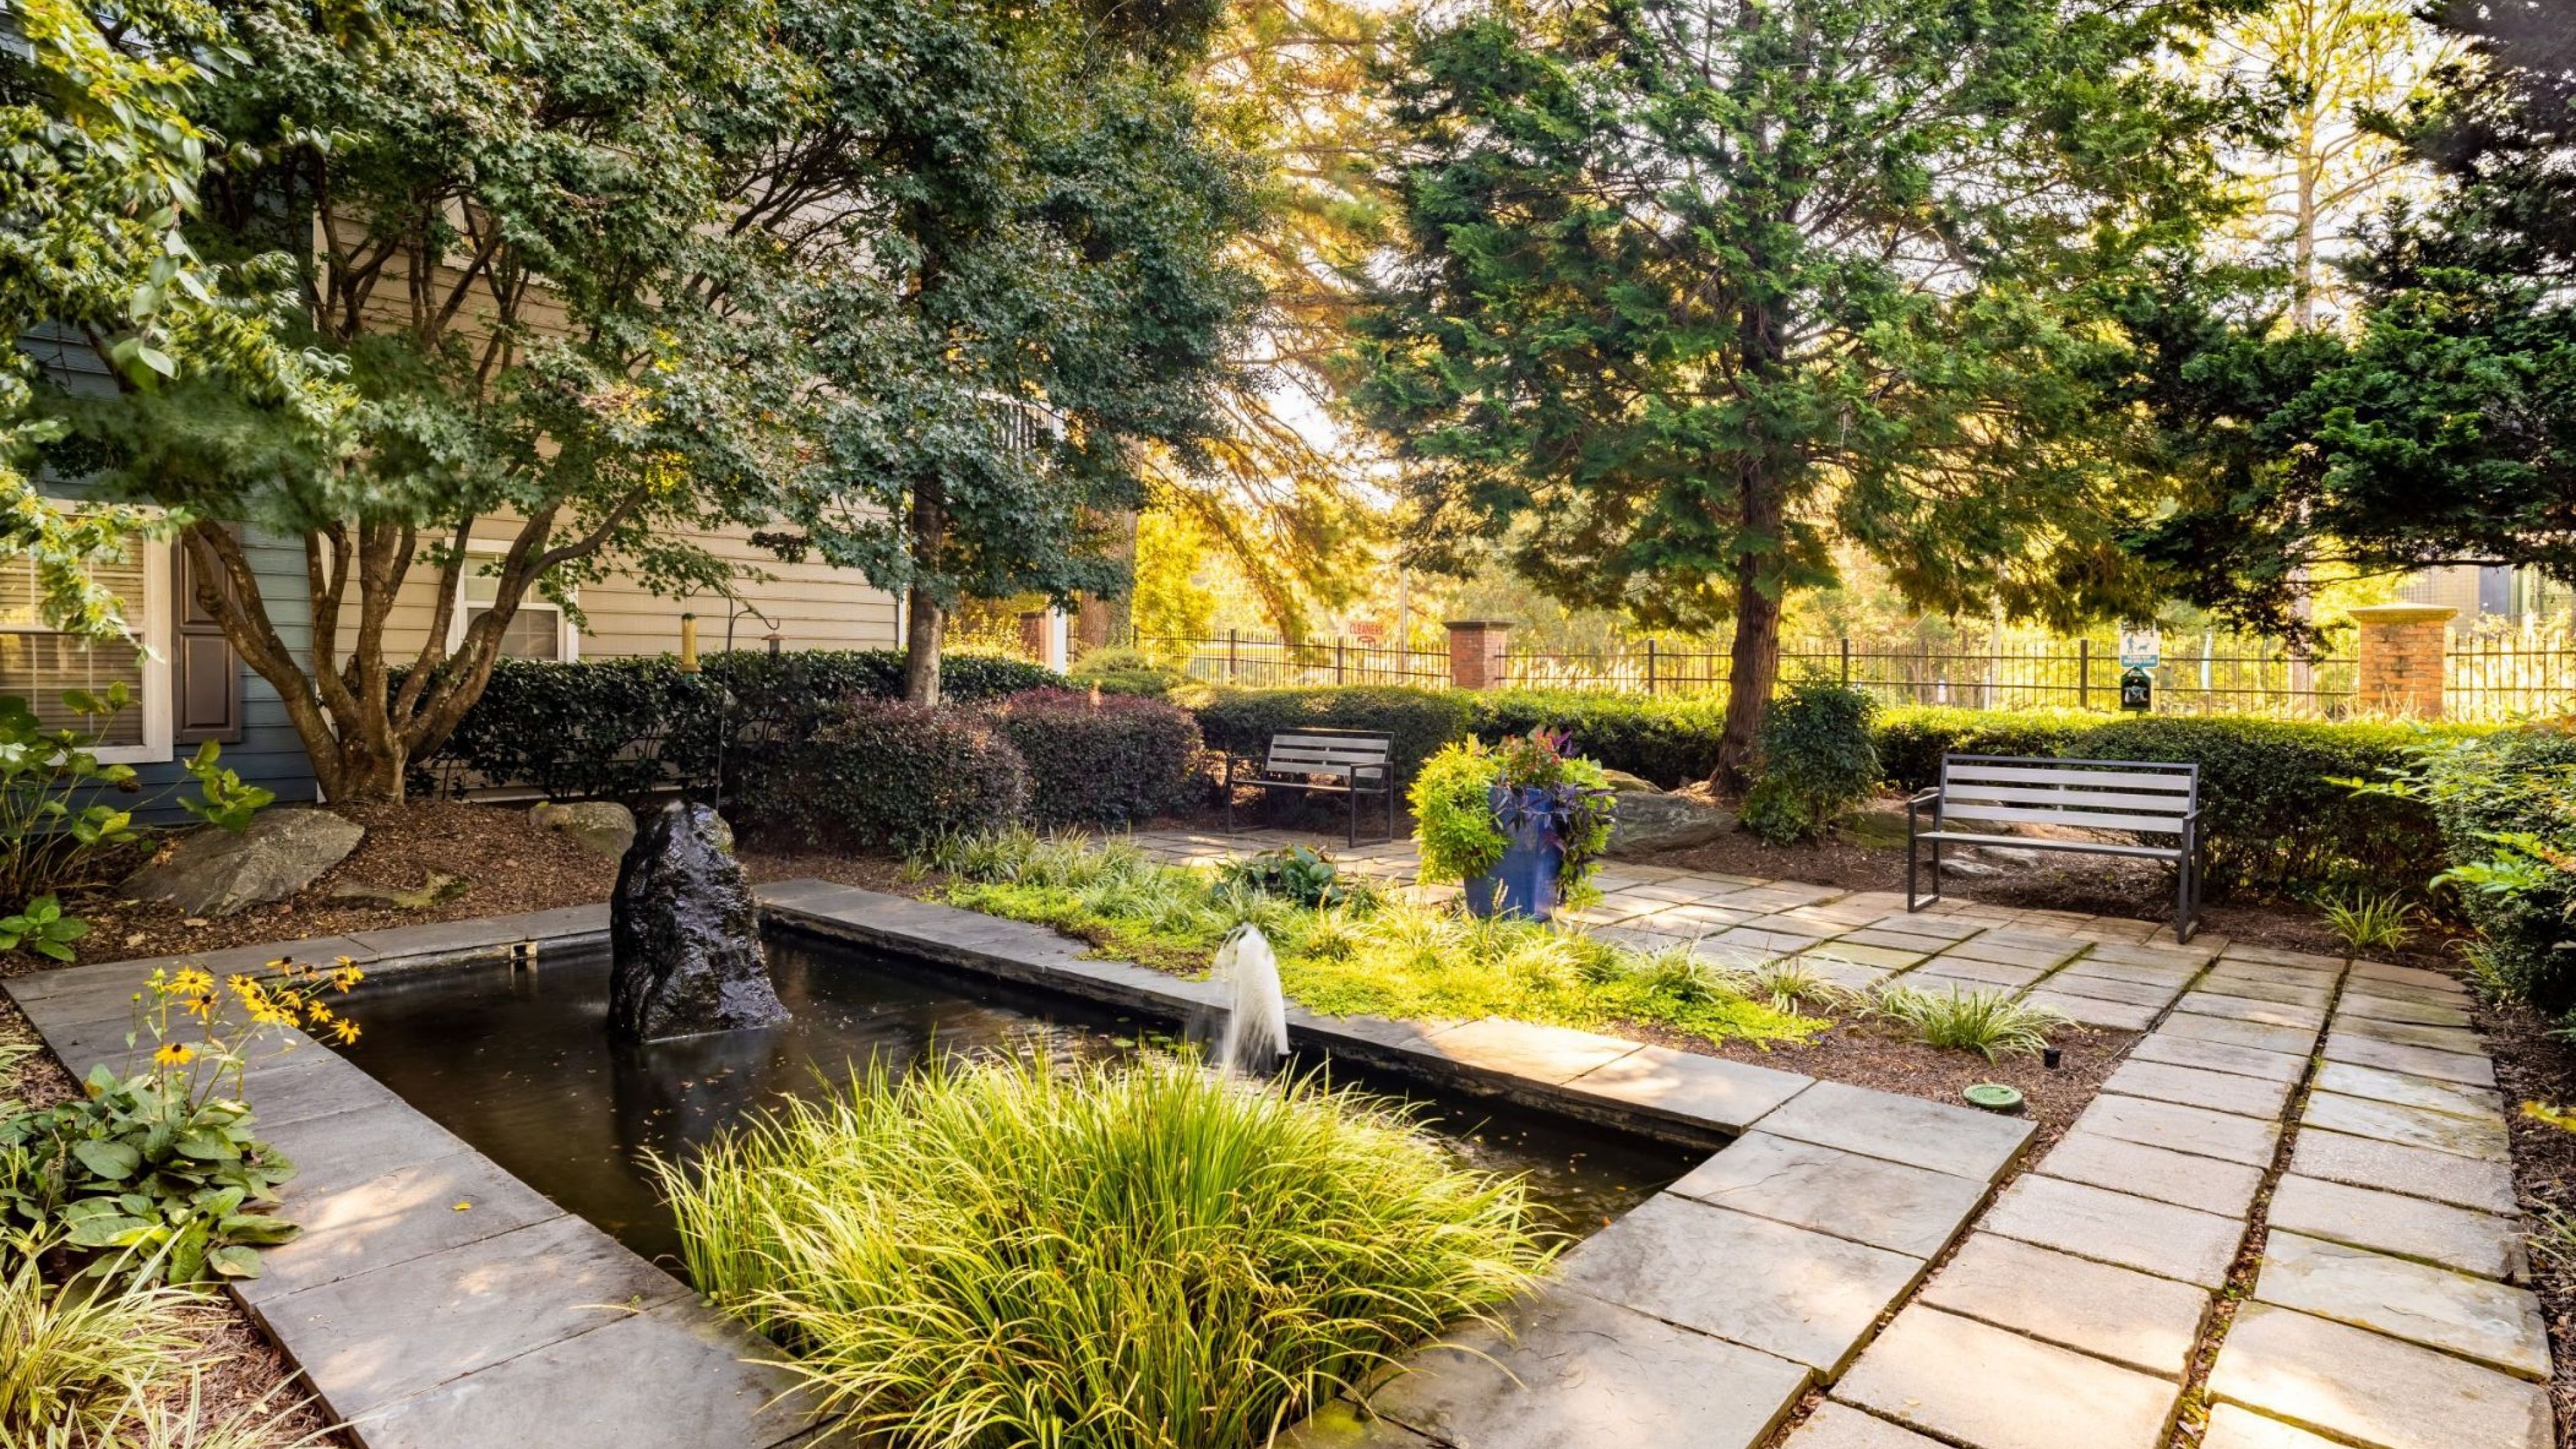 Hawthorne North Druid Hills outdoor koi pond garden space with benches and surrounding greenery